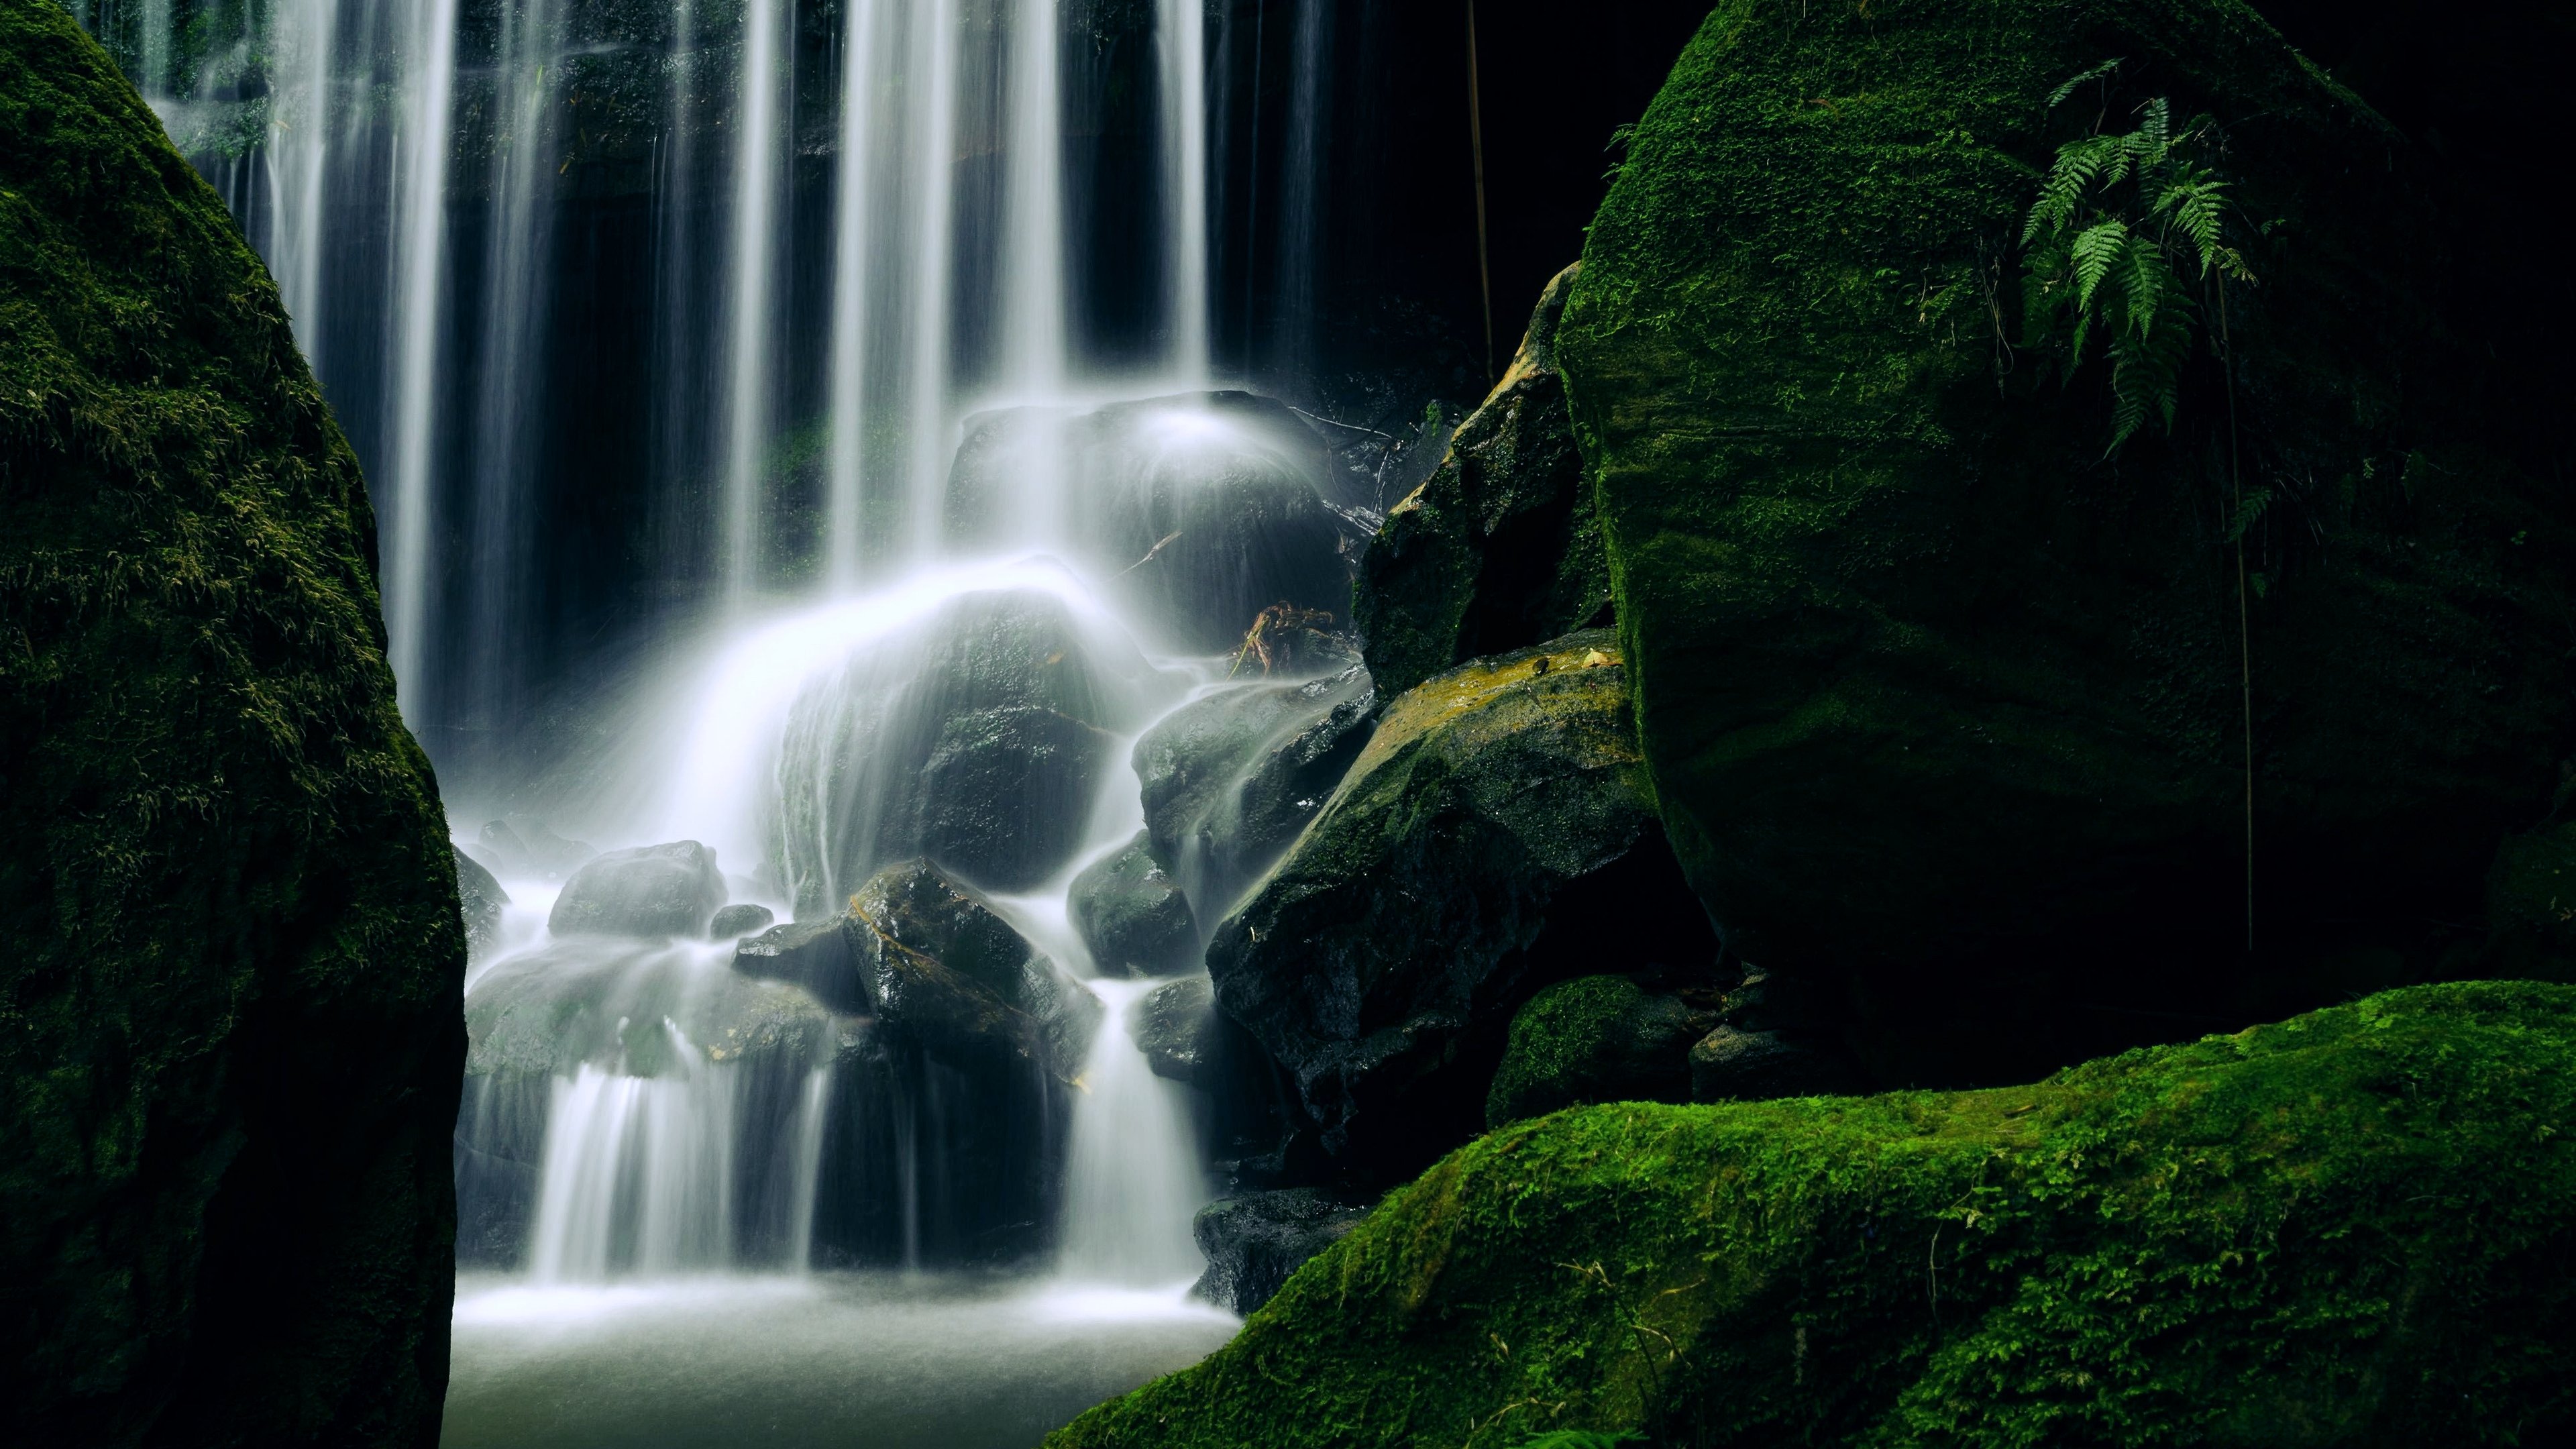 mossy, Waterfalls, Nature, Earth, Water, Green, Lakes, Rocks, Stones, Landscapes Wallpaper